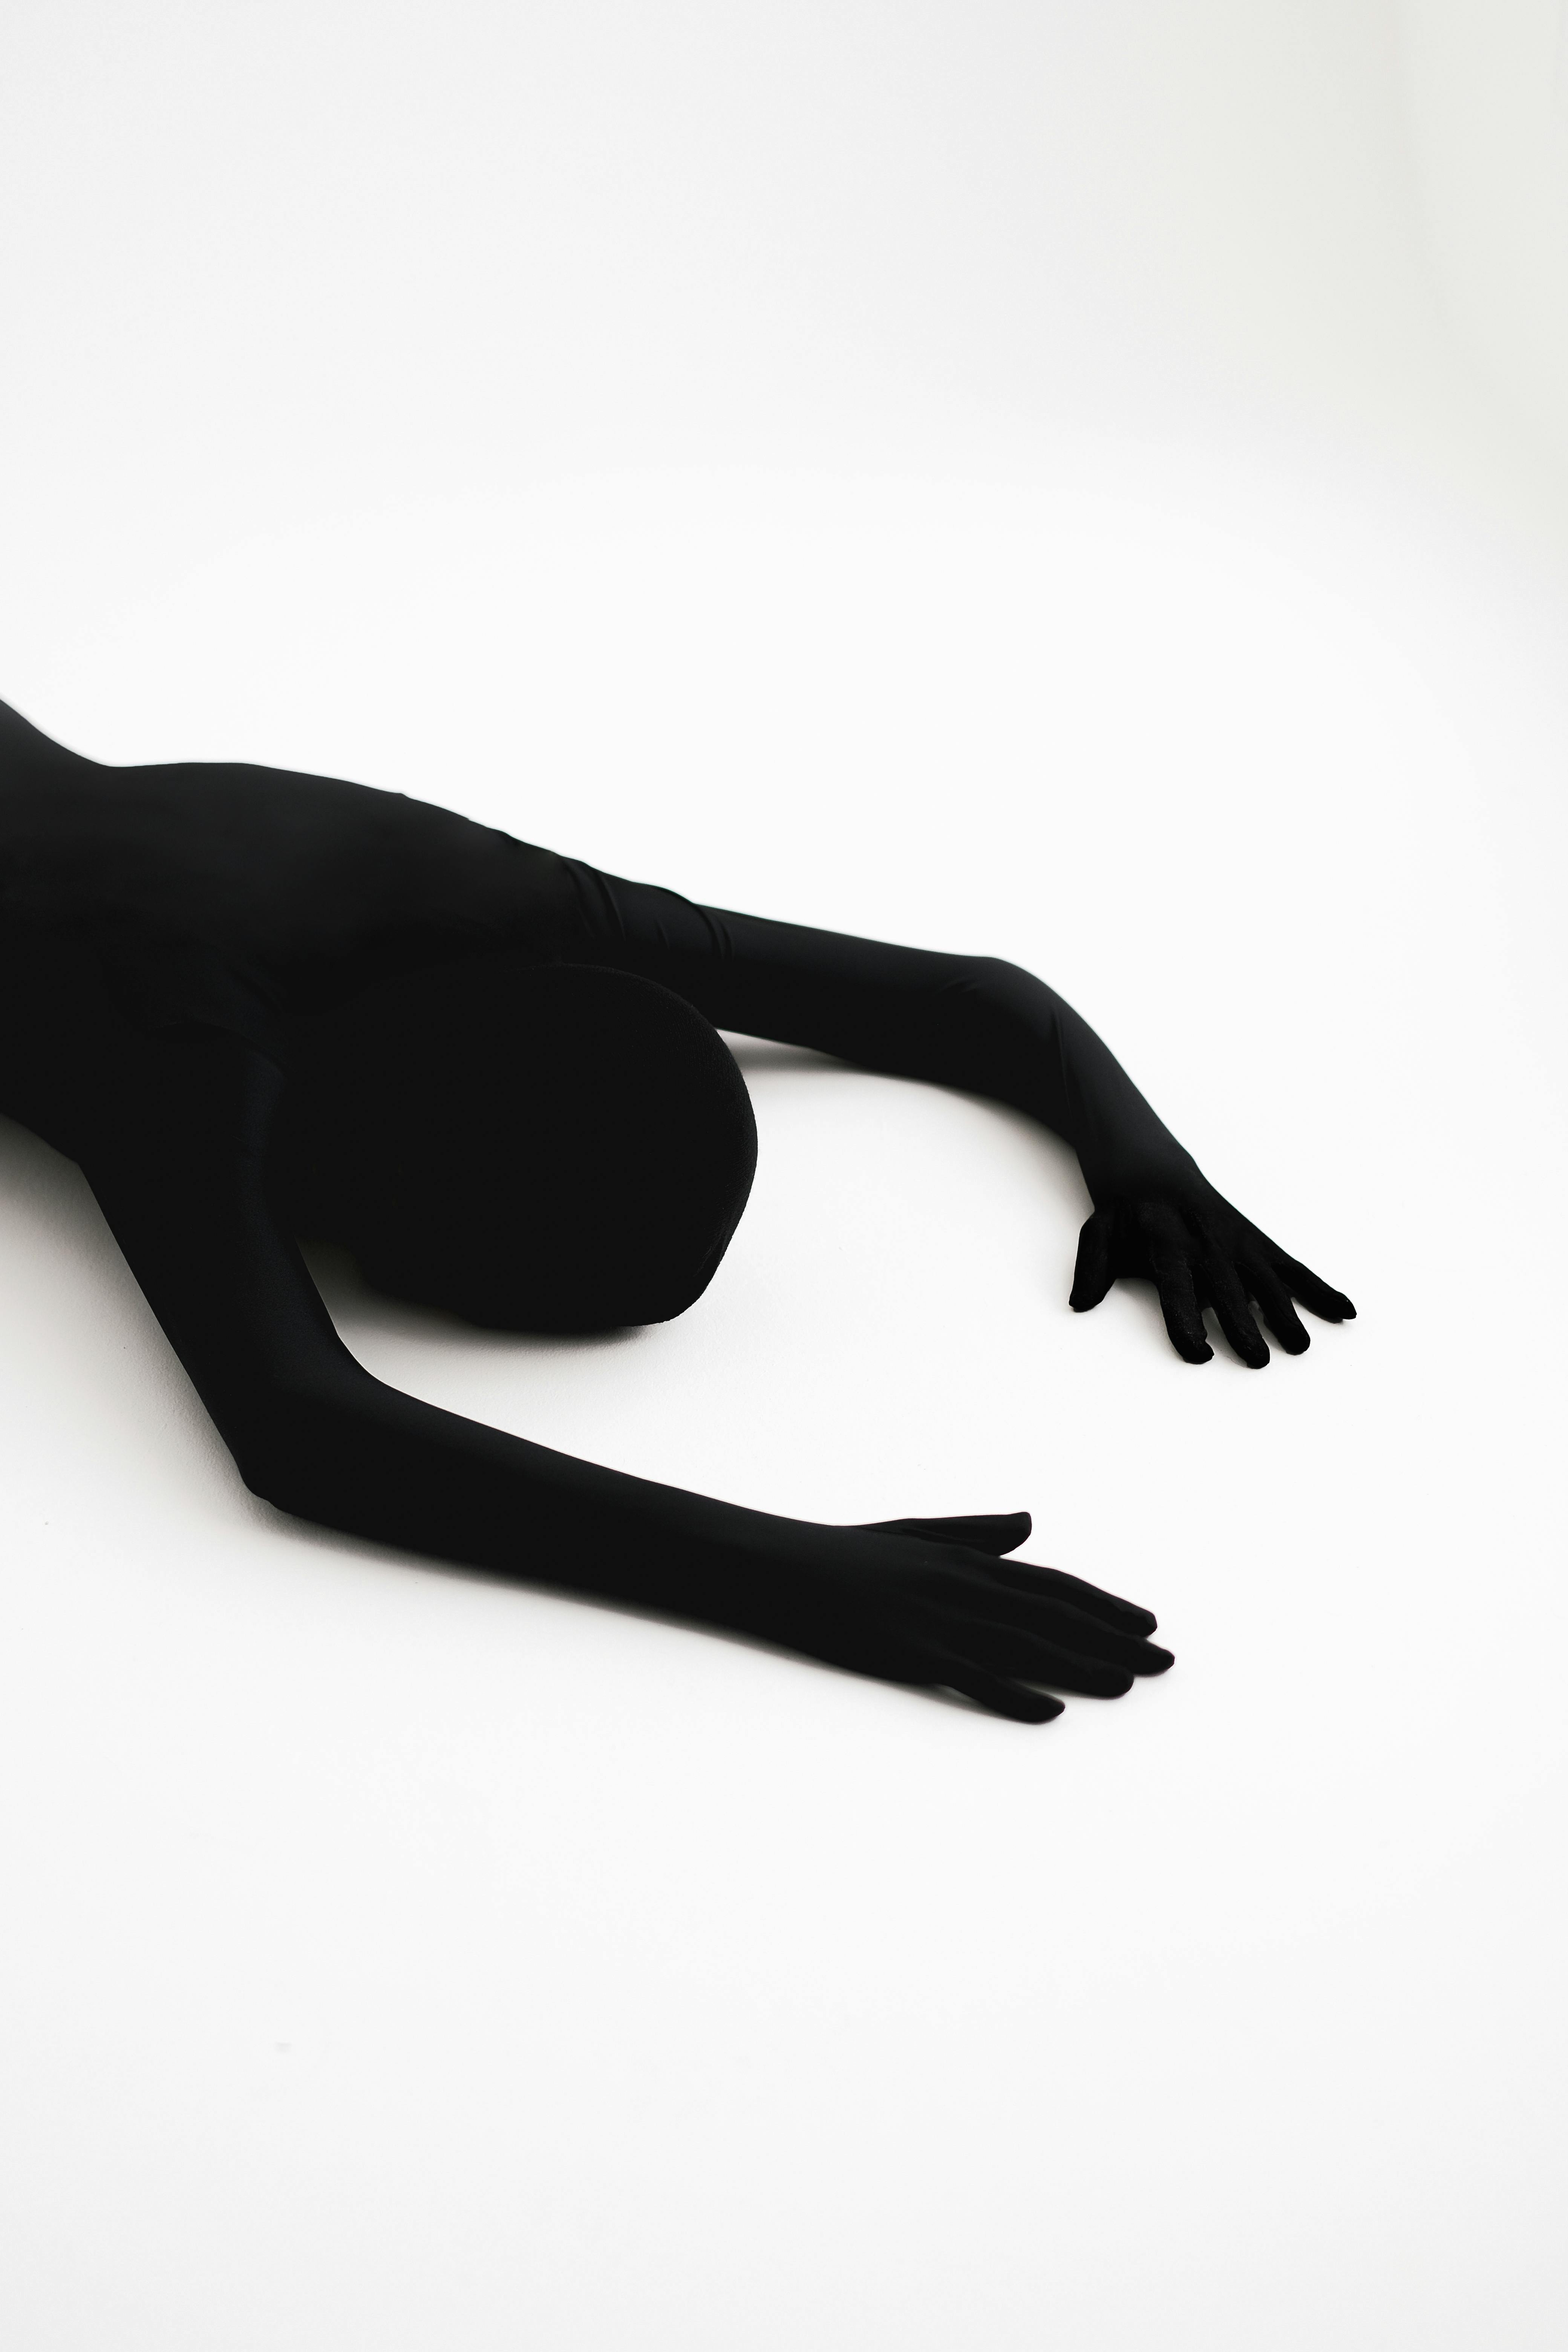 A Person in Black Zentai Suit Lying on a White Surface · Free